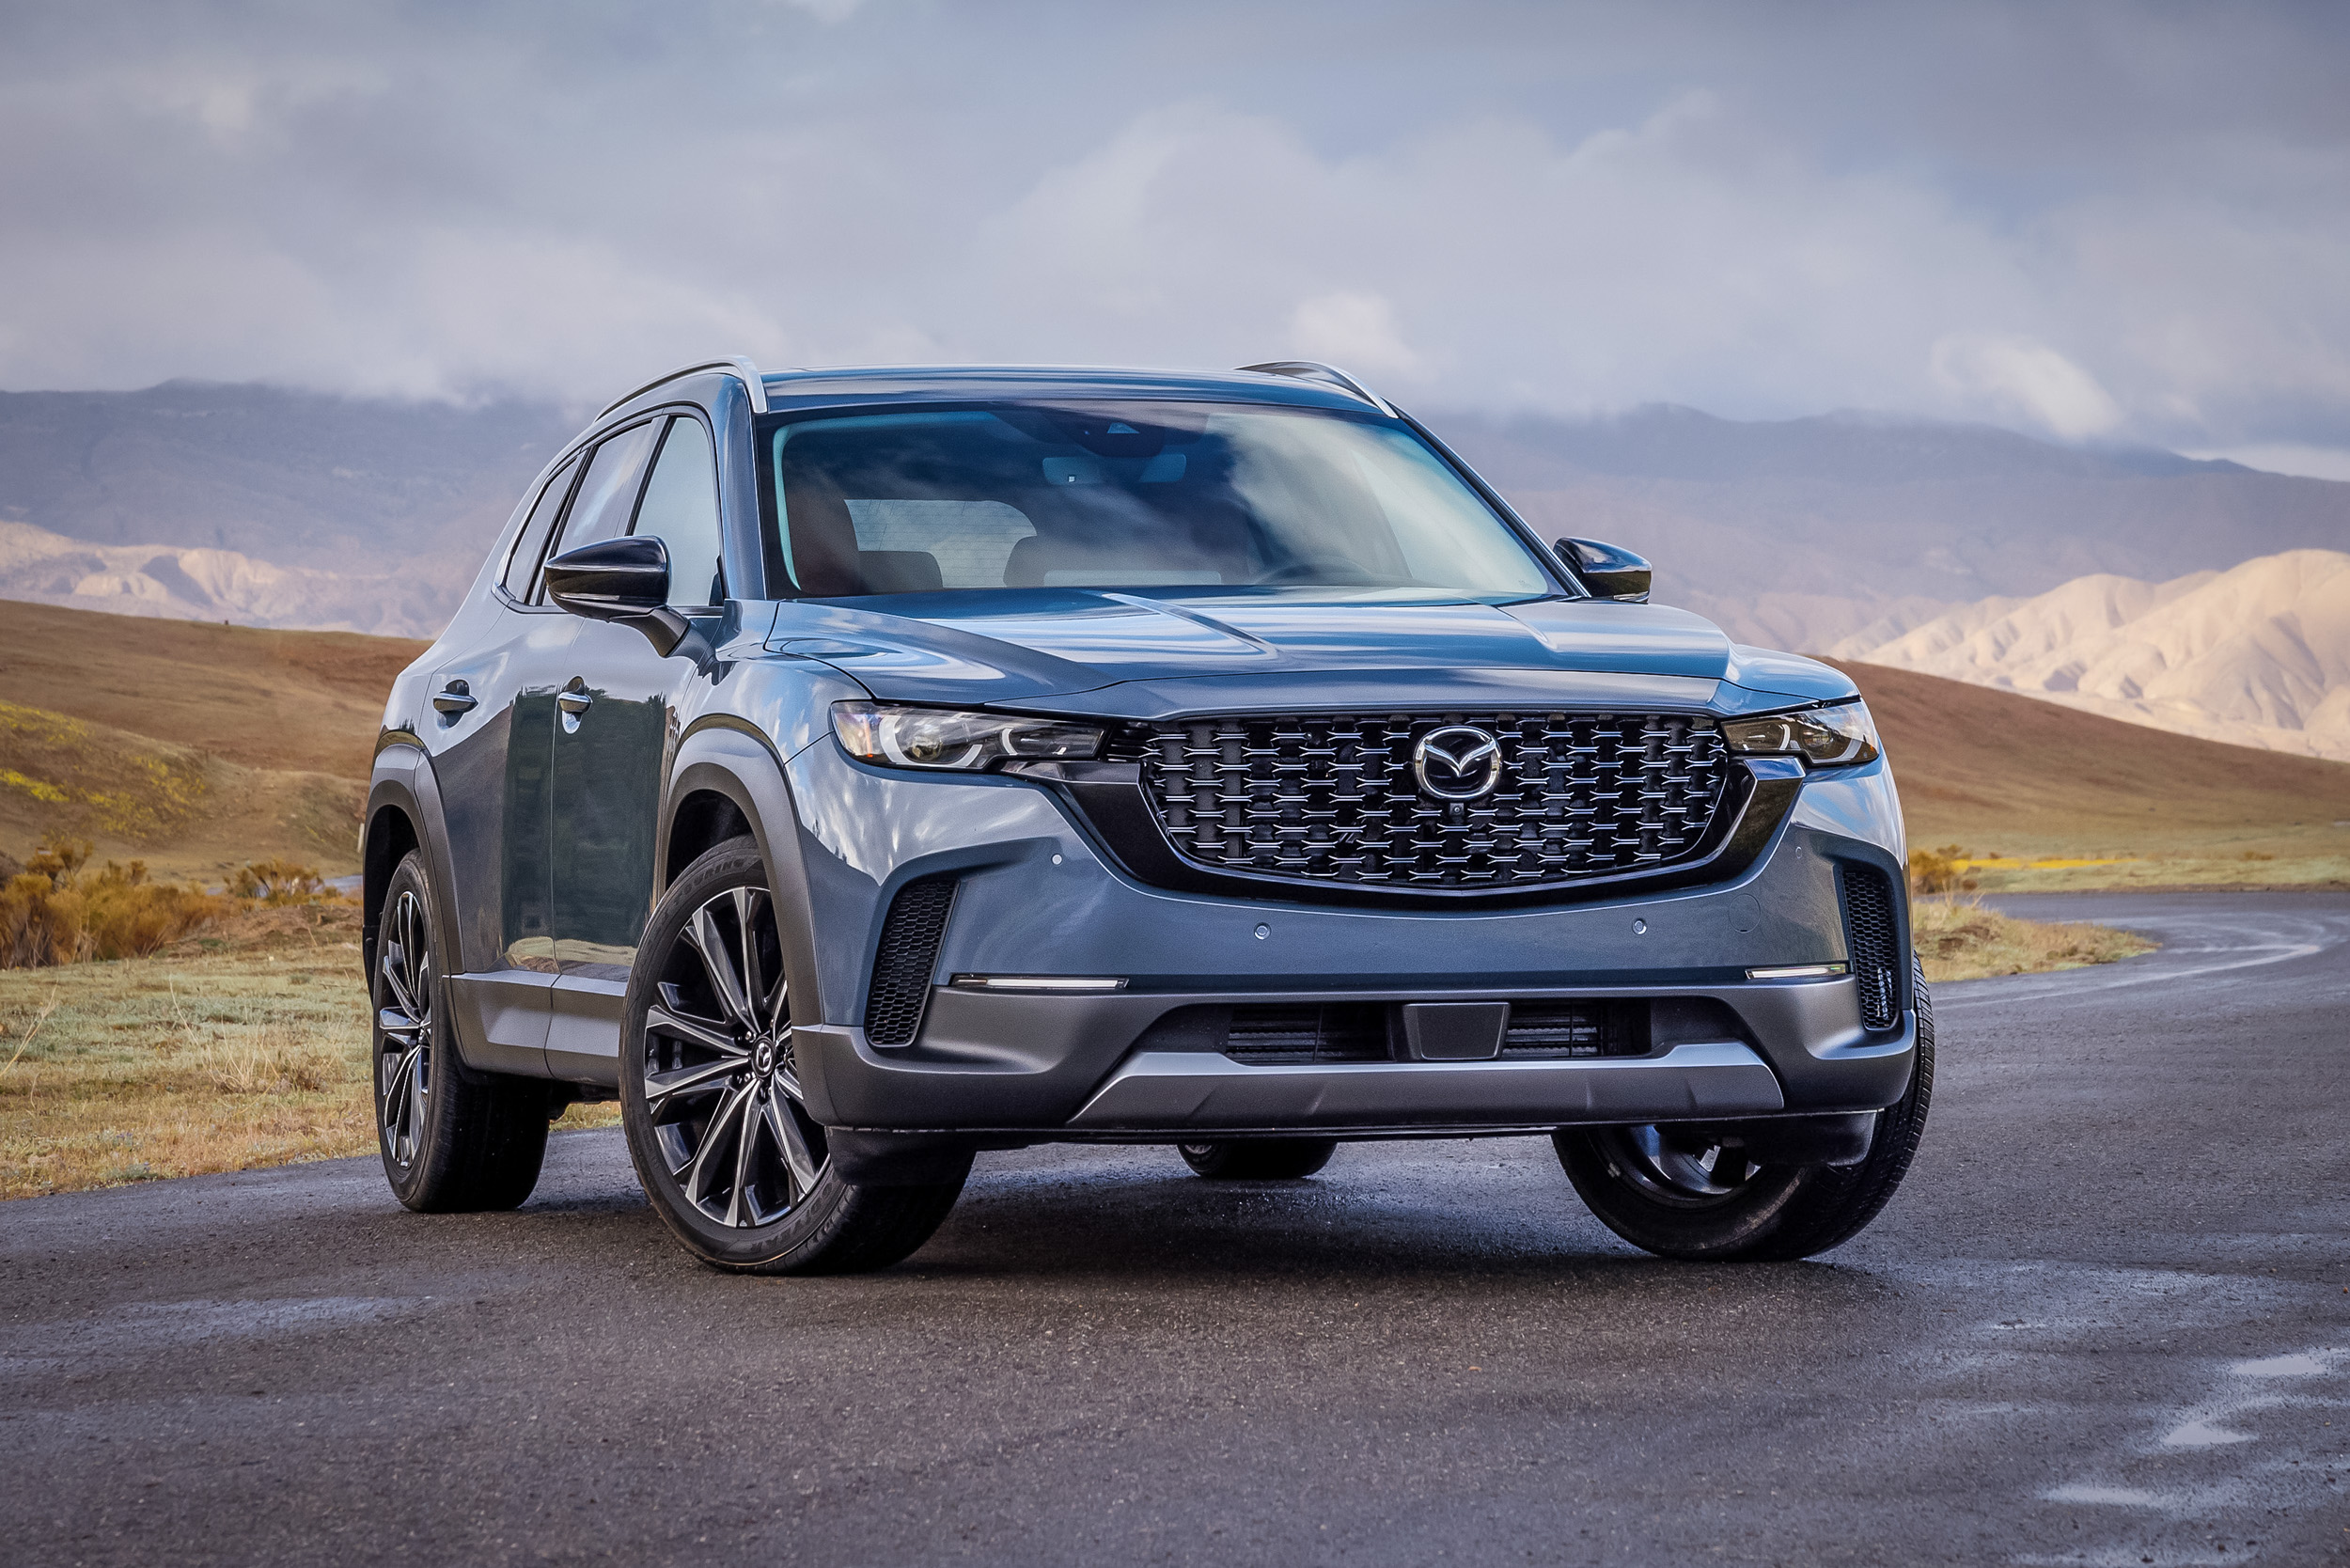 2023 Mazda CX-50: The Outdoorsy Crossover That's Fun to Drive | GearJunkie